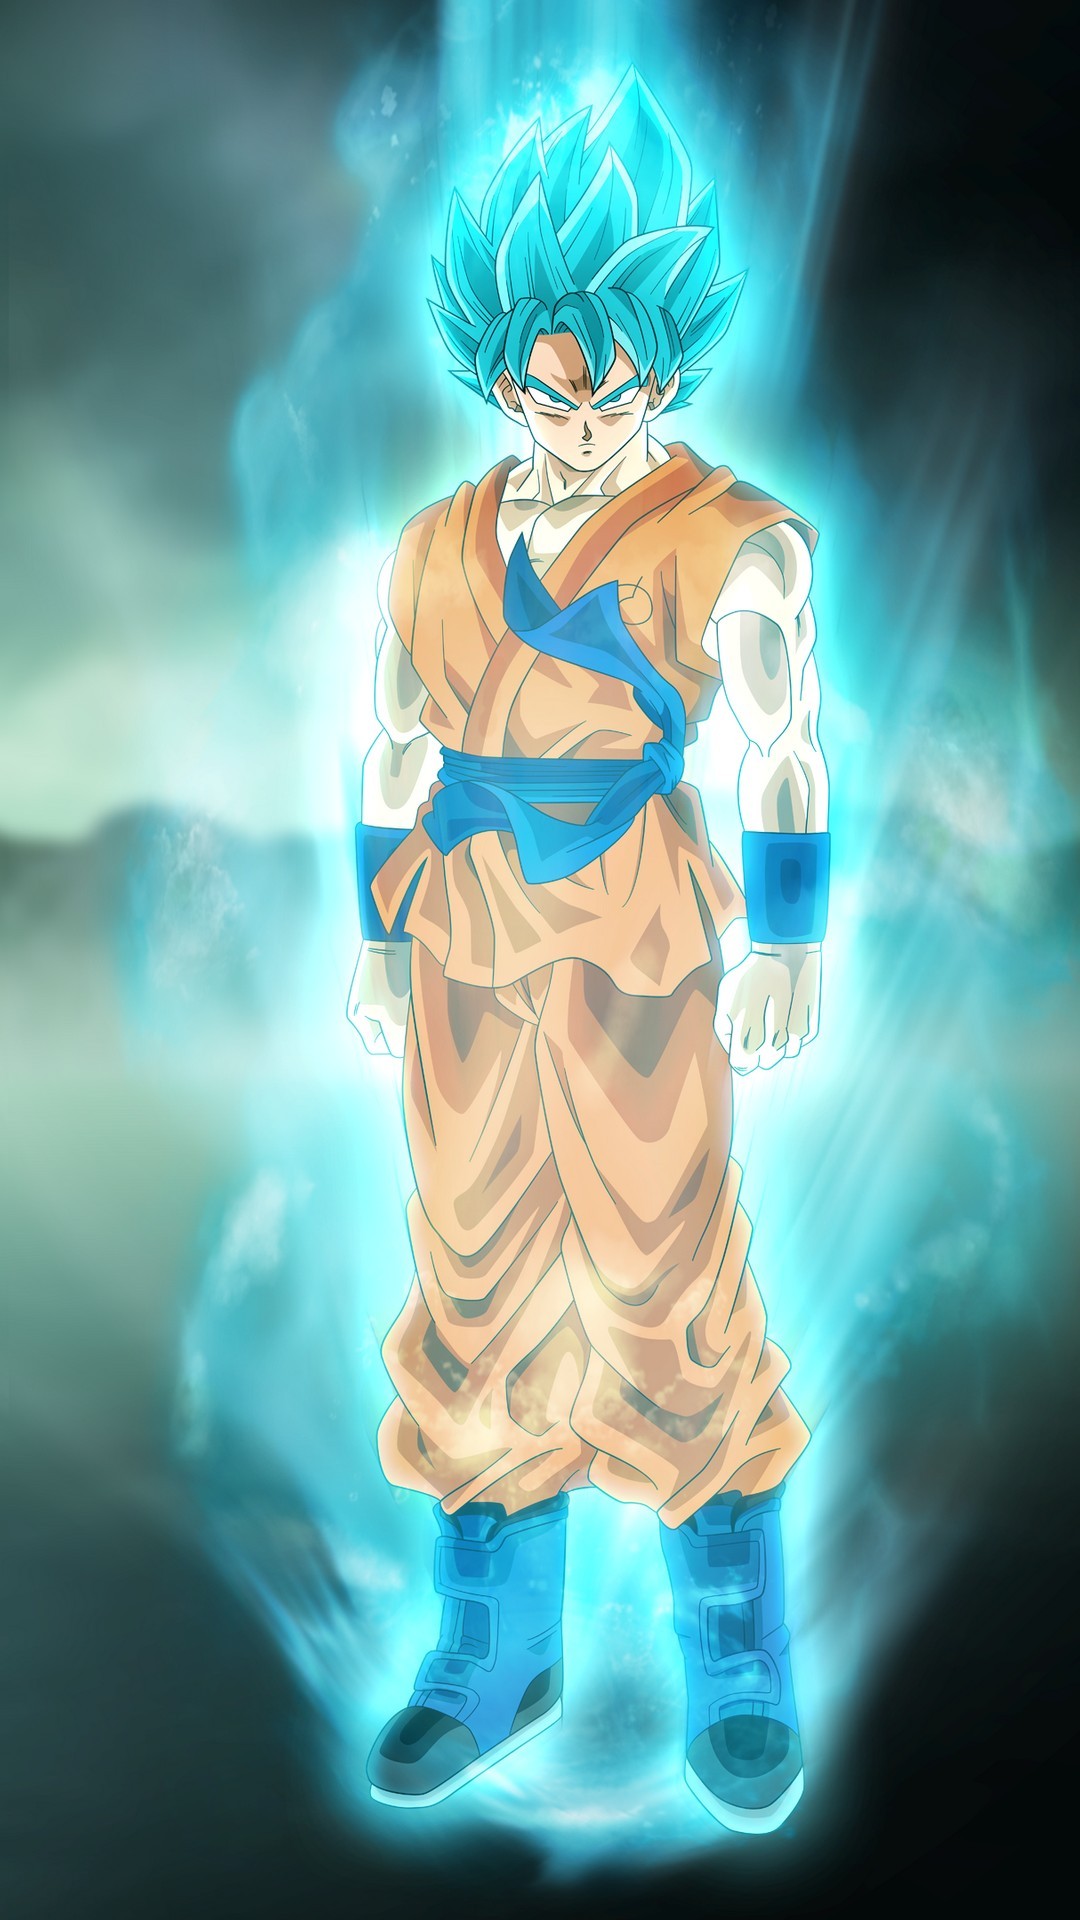 iPhone X Wallpaper Goku SSJ with image resolution 1080x1920 pixel. You can make this wallpaper for your iPhone 5, 6, 7, 8, X backgrounds, Mobile Screensaver, or iPad Lock Screen